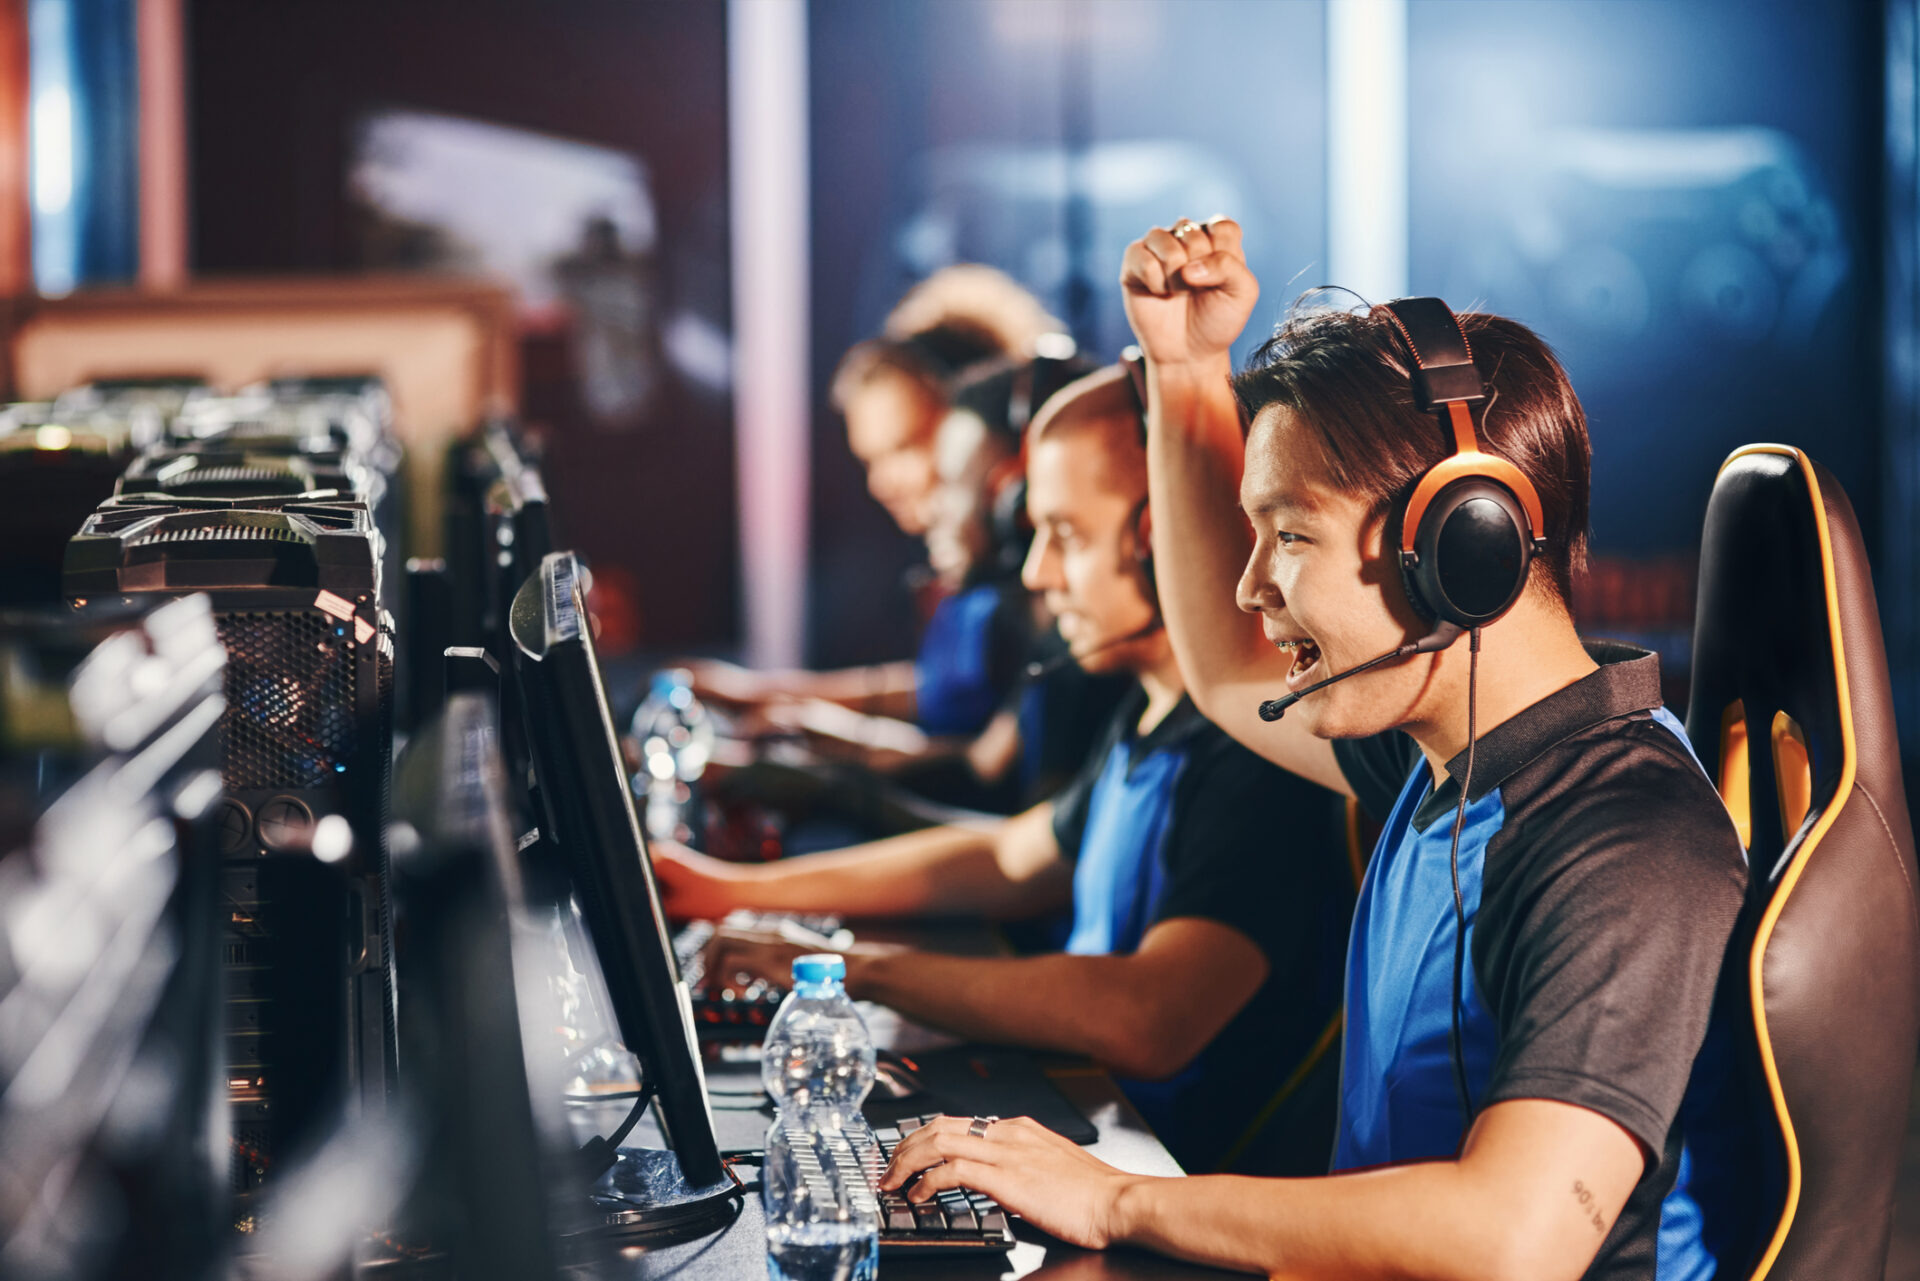 competitions-e-sport